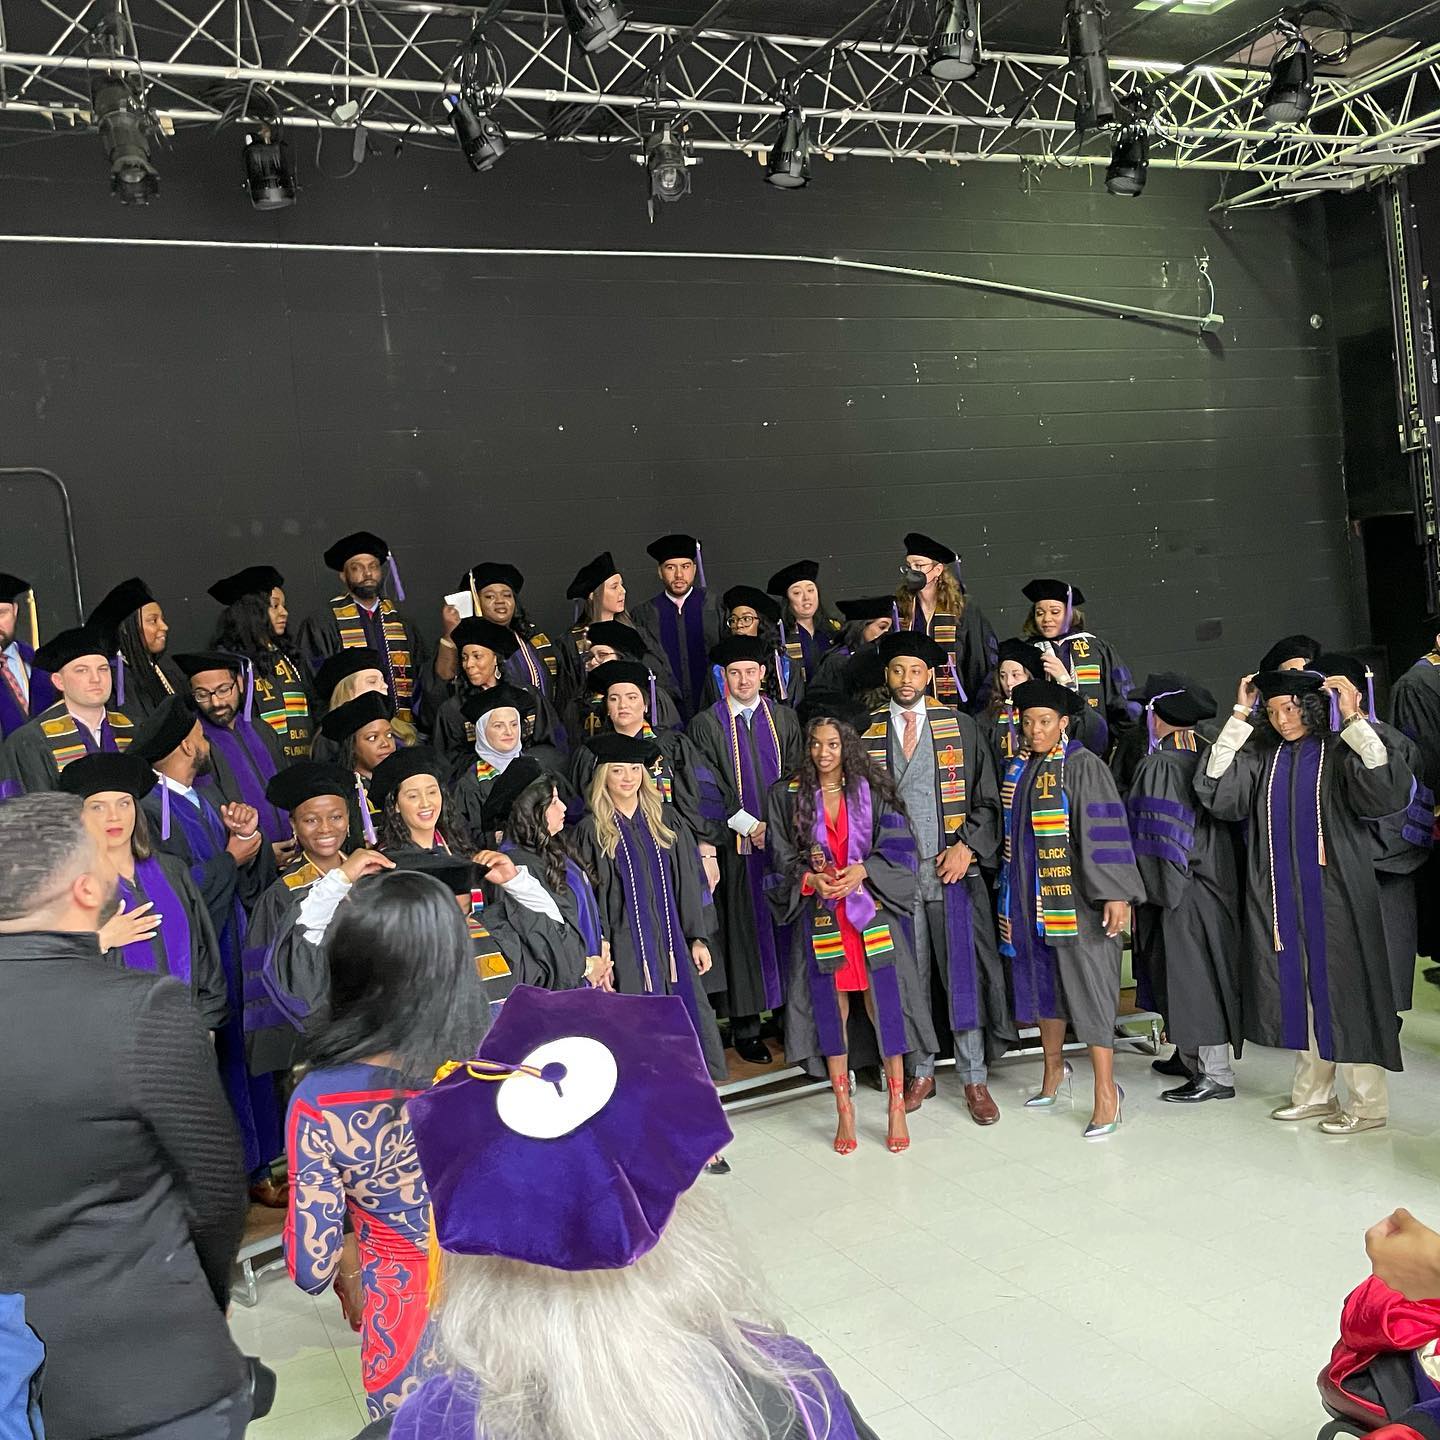 Lining up for a little group photo before heading out to the hooding ceremony. @franklin_liranzo photography is making everyone look even better than they do.